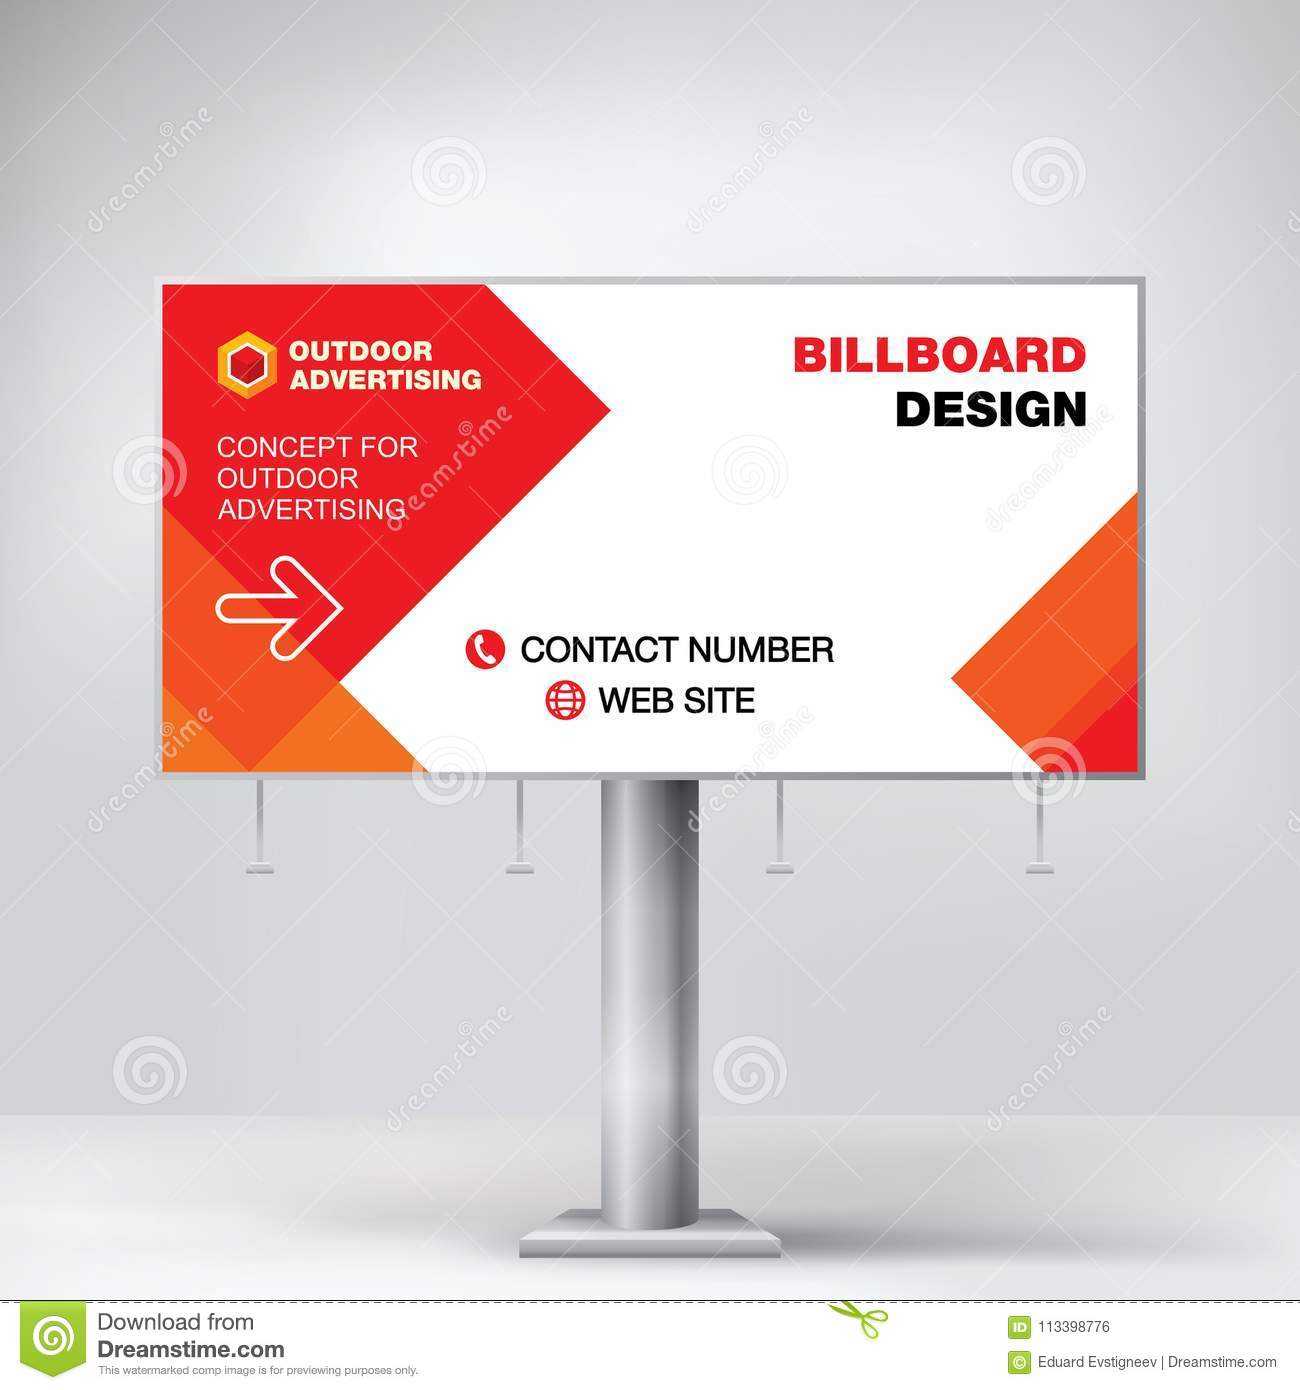 Billboard Design, Template For Outdoor Advertising, Modern Intended For Outdoor Banner Design Templates